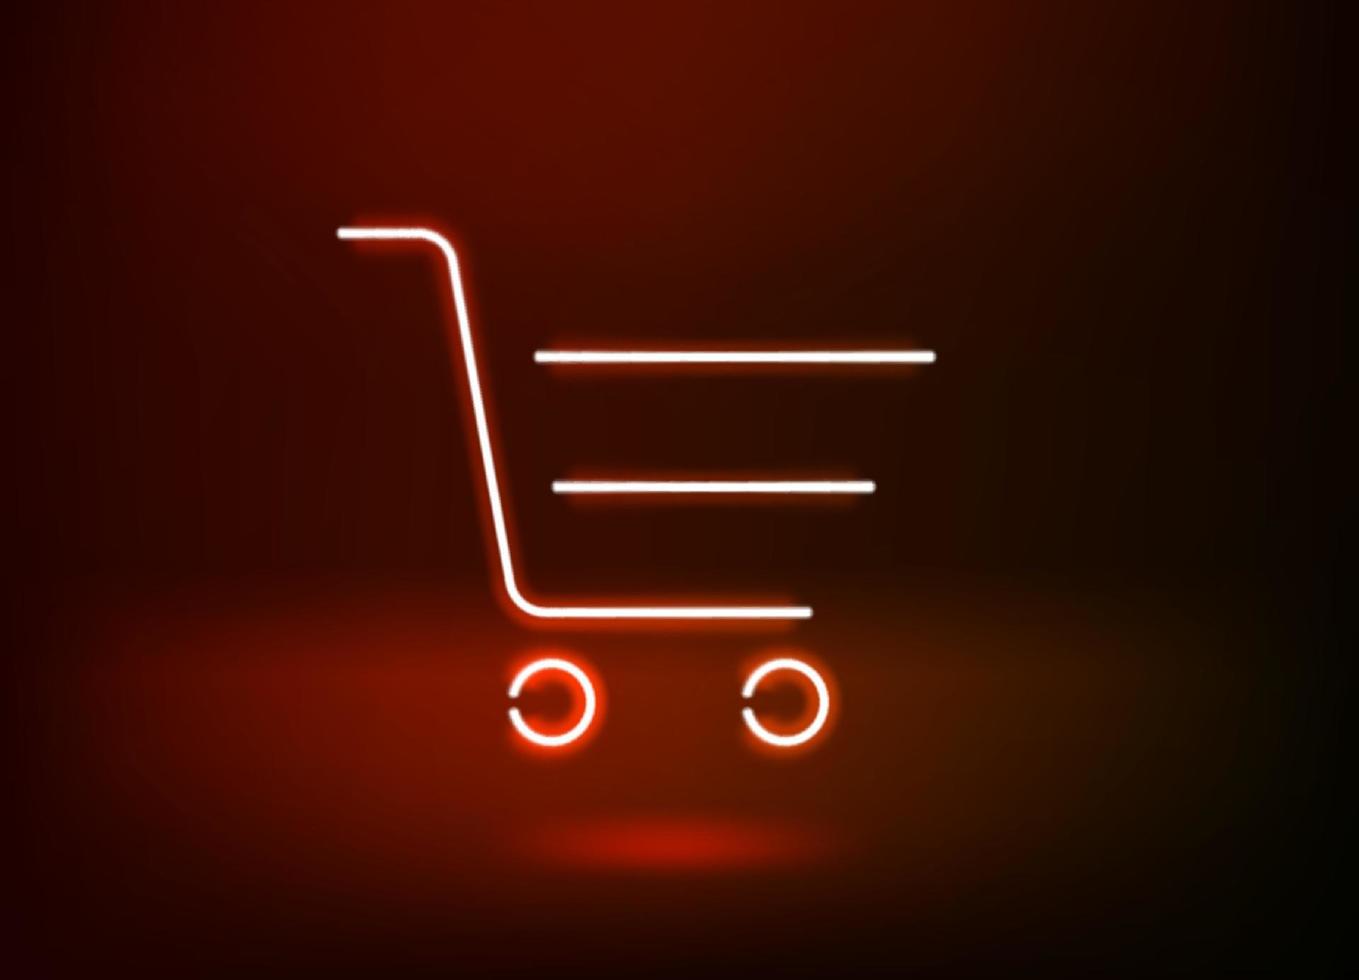 Neon glowing shopping cart icon. 3d vector illustration